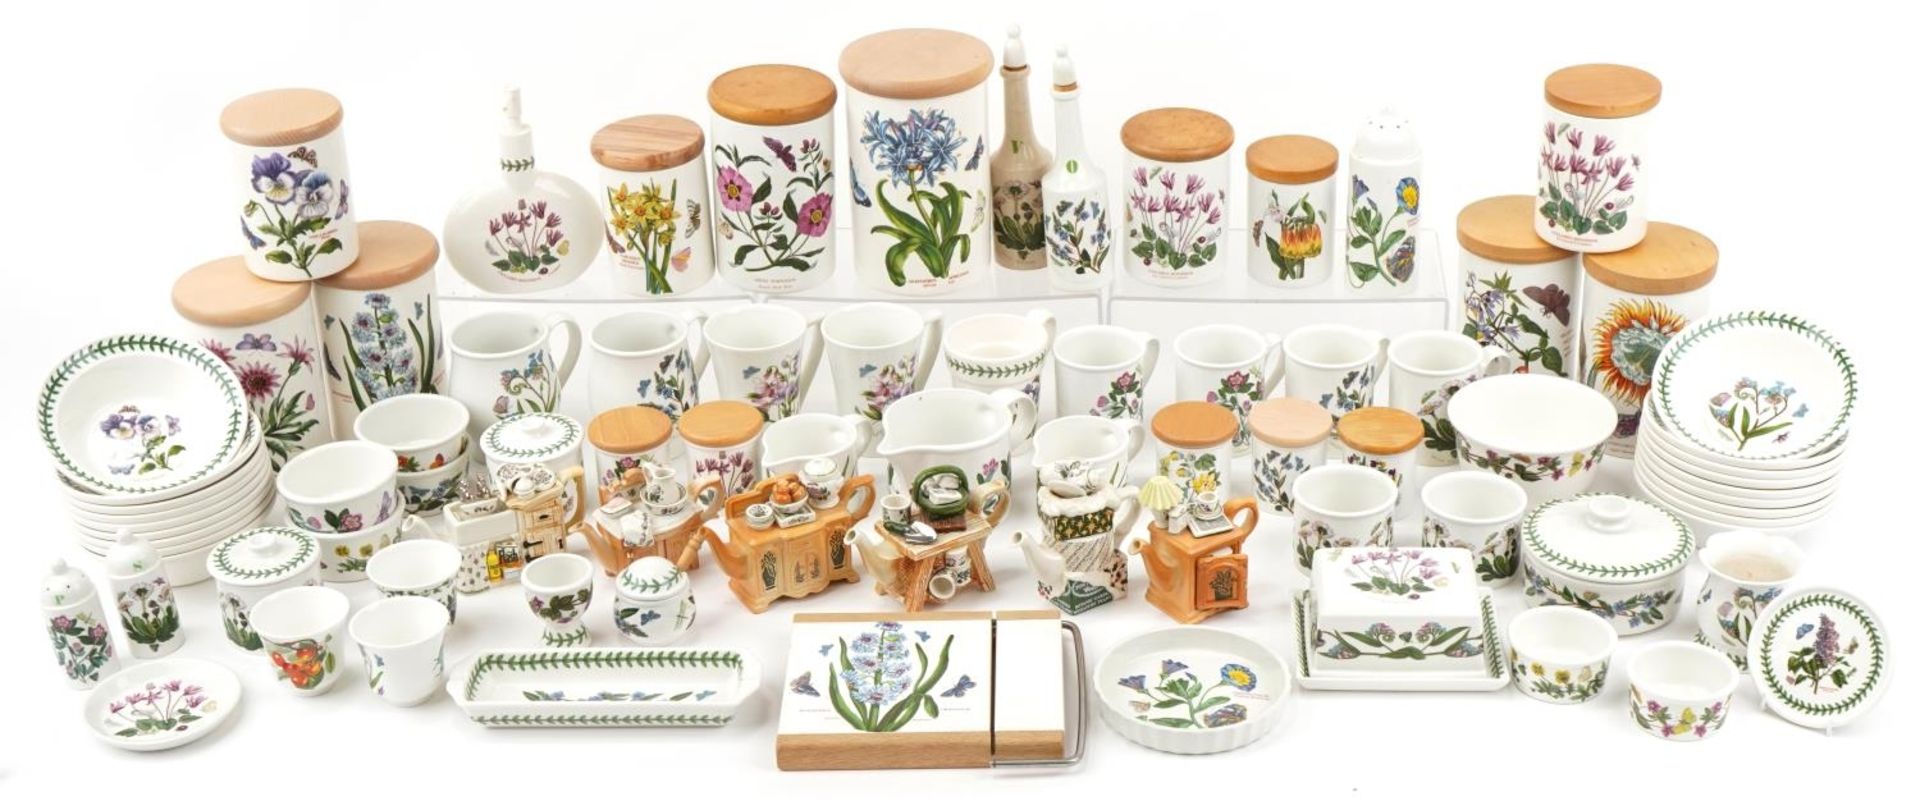 Large collection of Portmeirion Botanic Garden dinnerware, teaware and storage jars, the largest